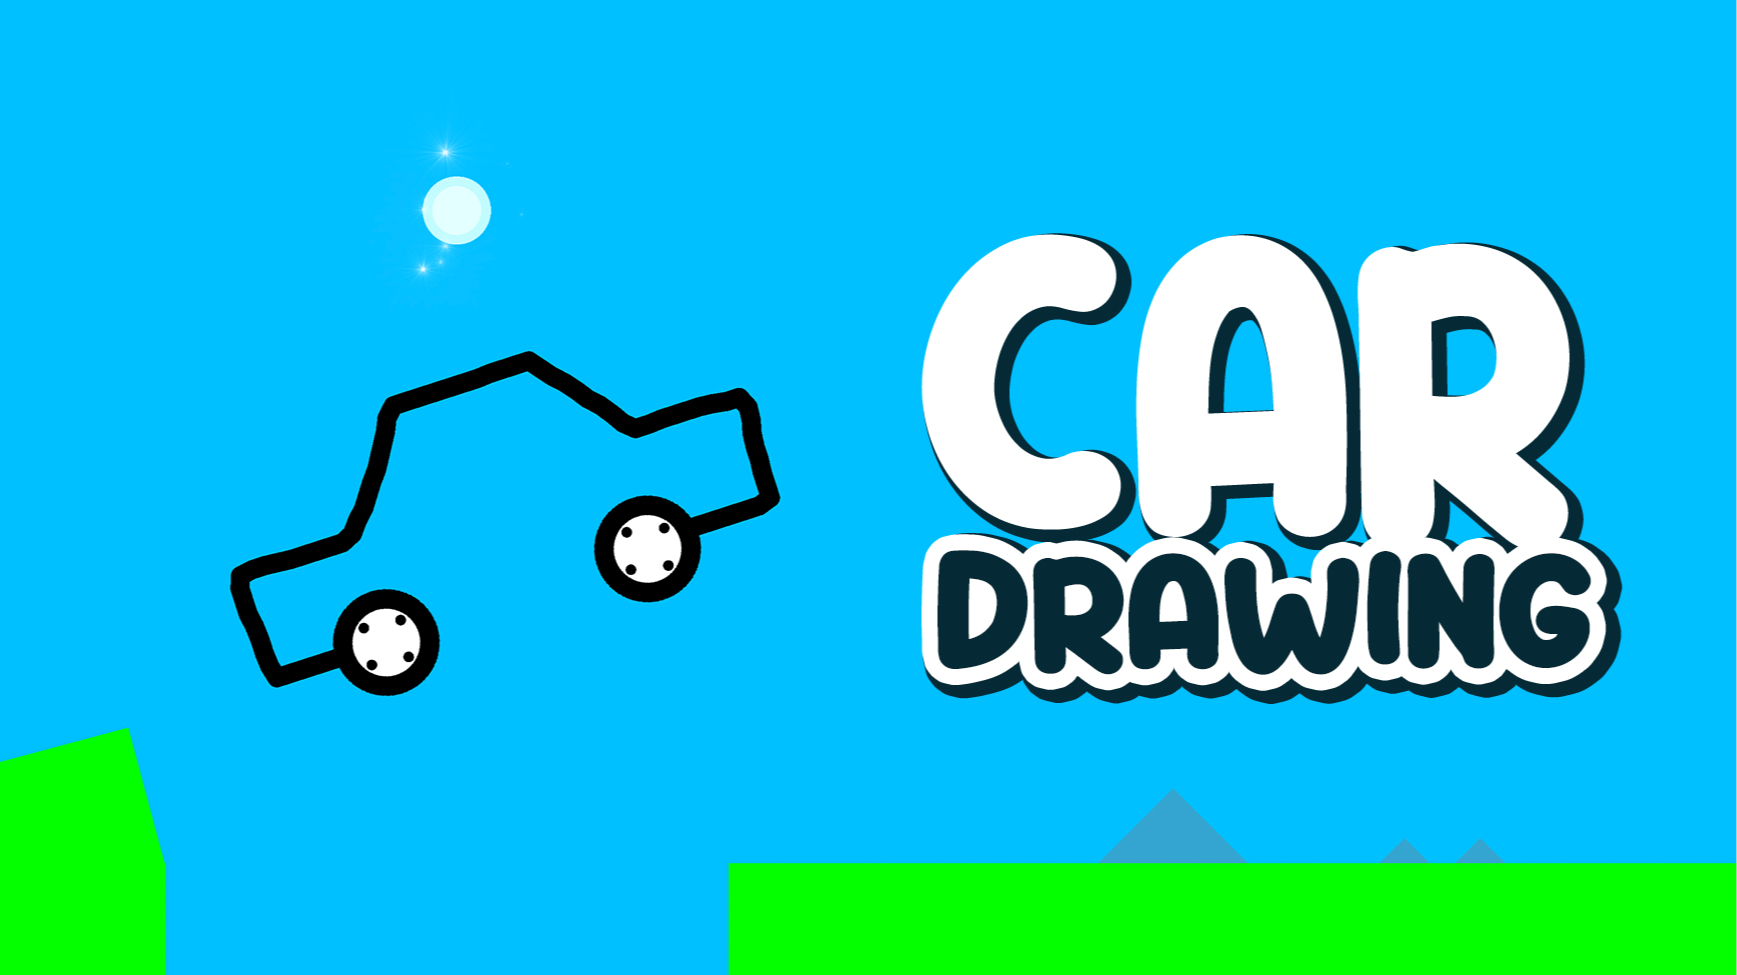 Drawing games: 15 apps to help spark your creativity | Creative Bloq